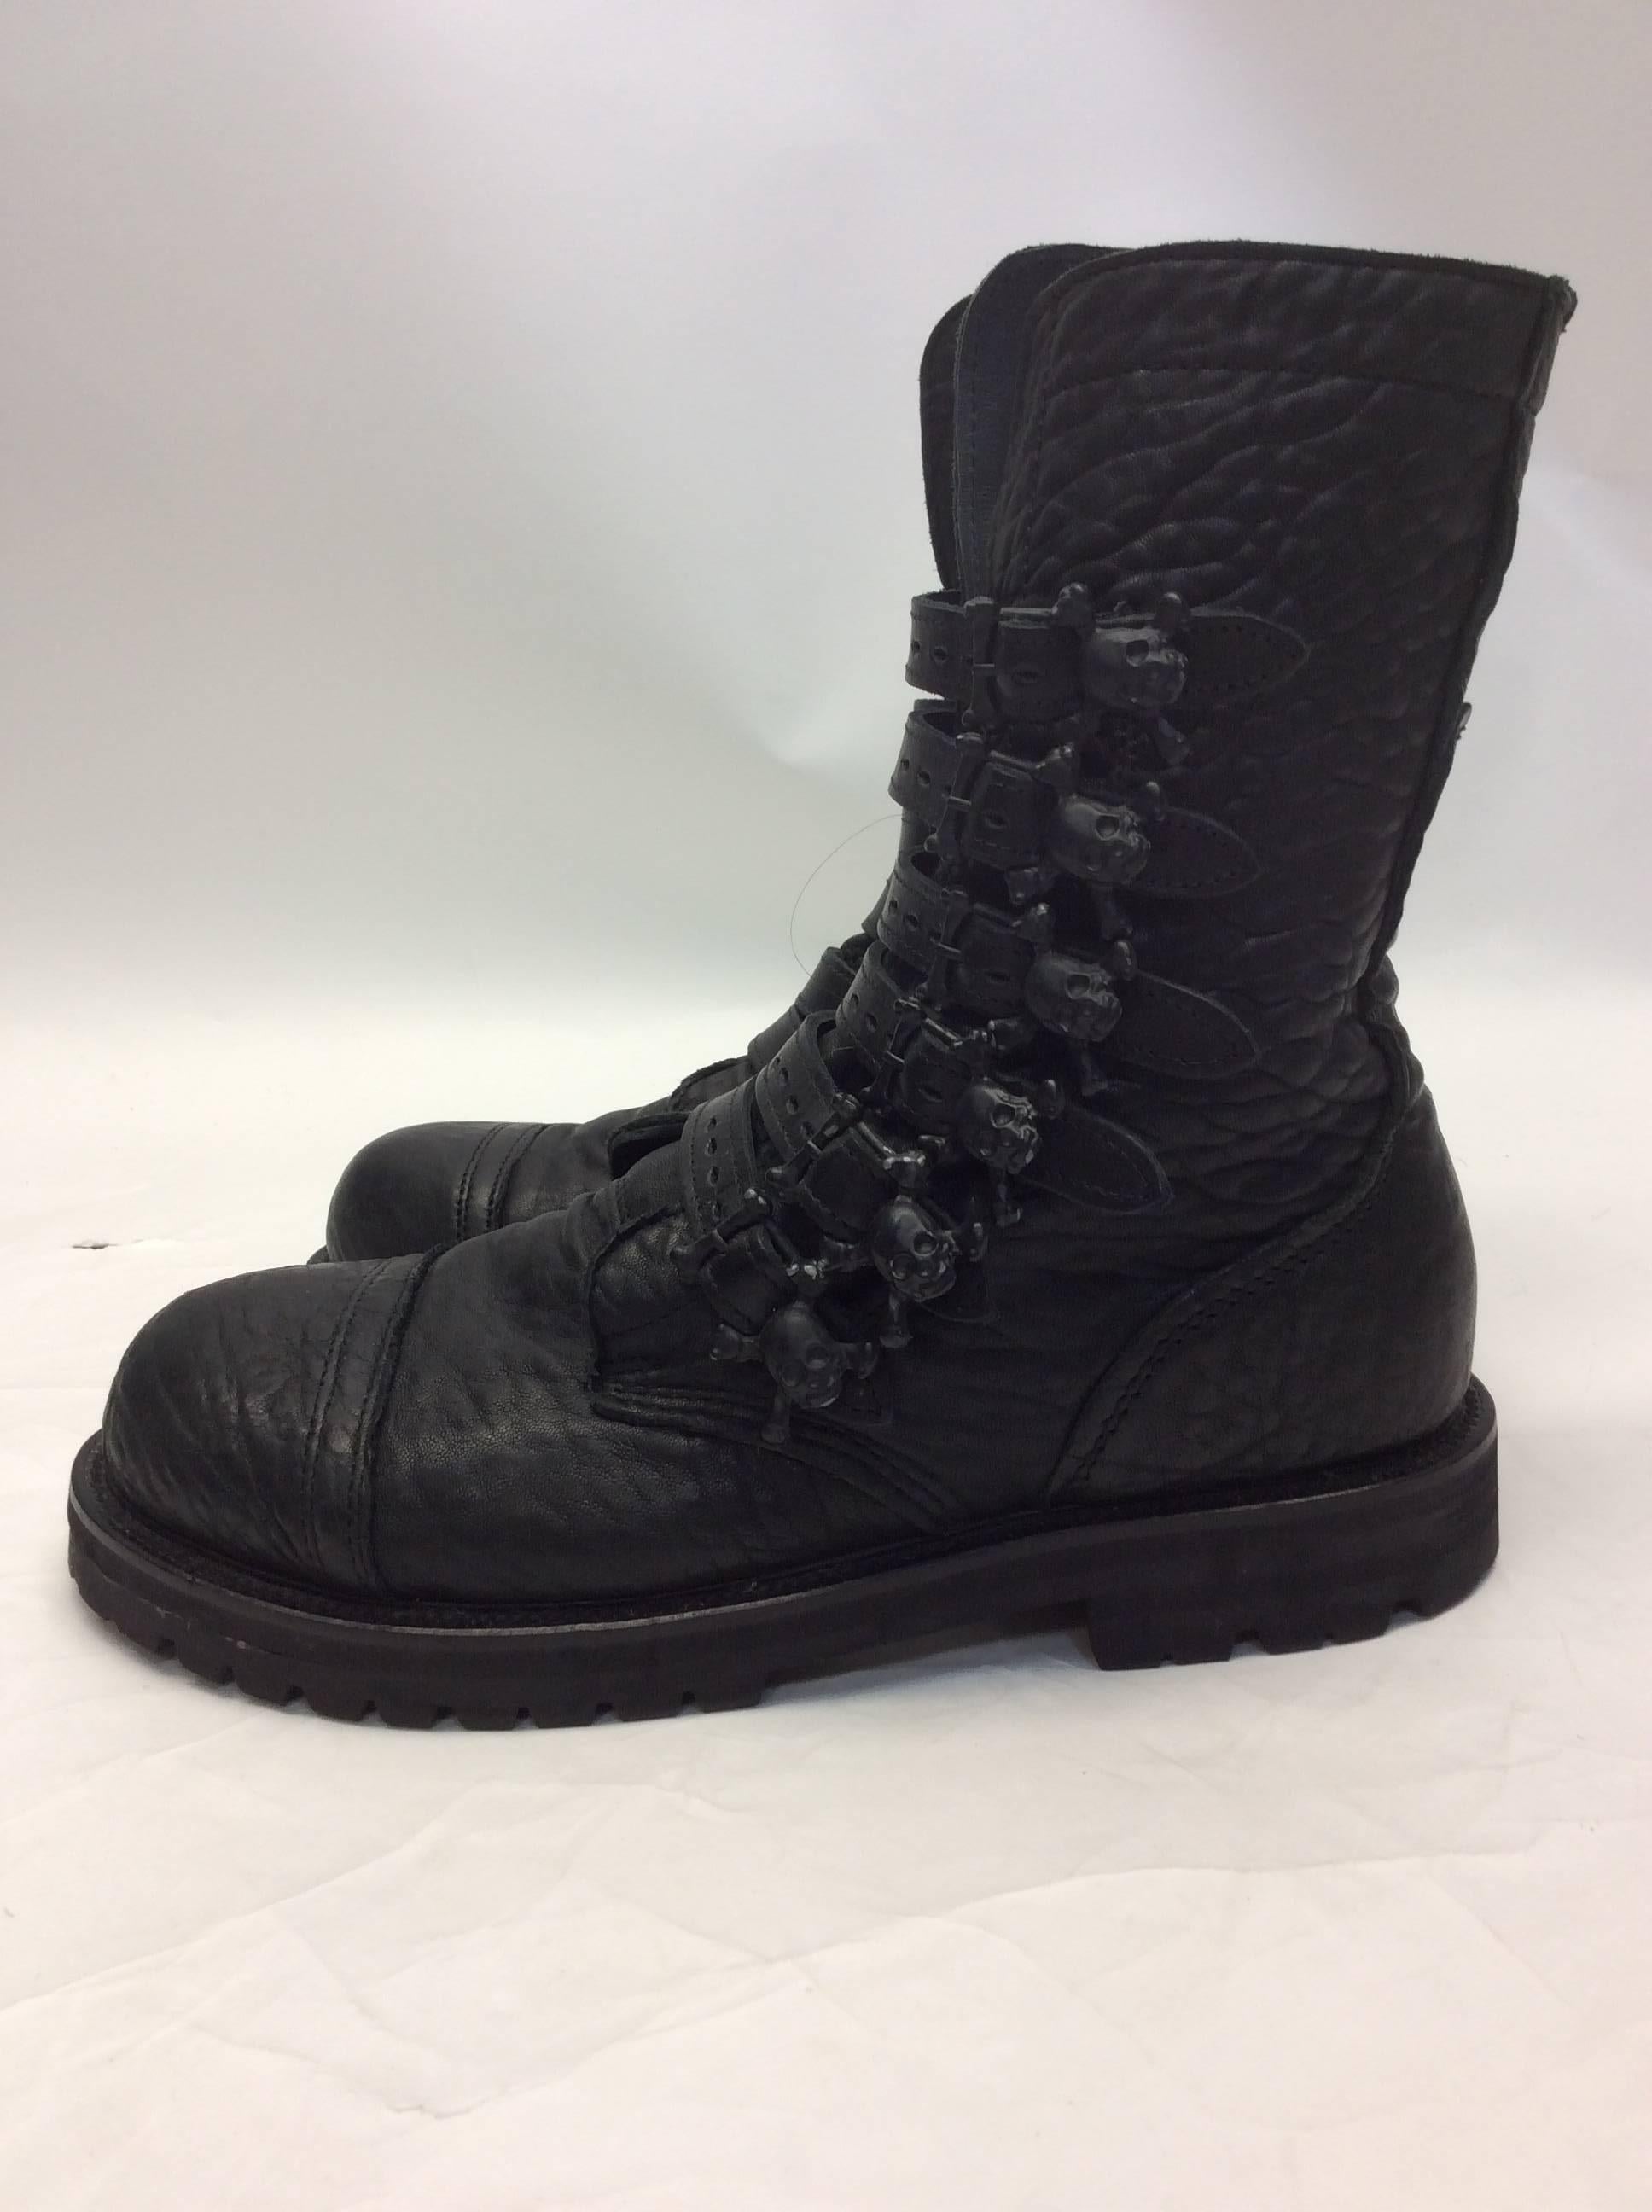 Alexander Wang Mens Combat Skull Boot
Size 10
$399
Skull detail up side, interior zipper
Small scuff on leather, back heel. See photo
